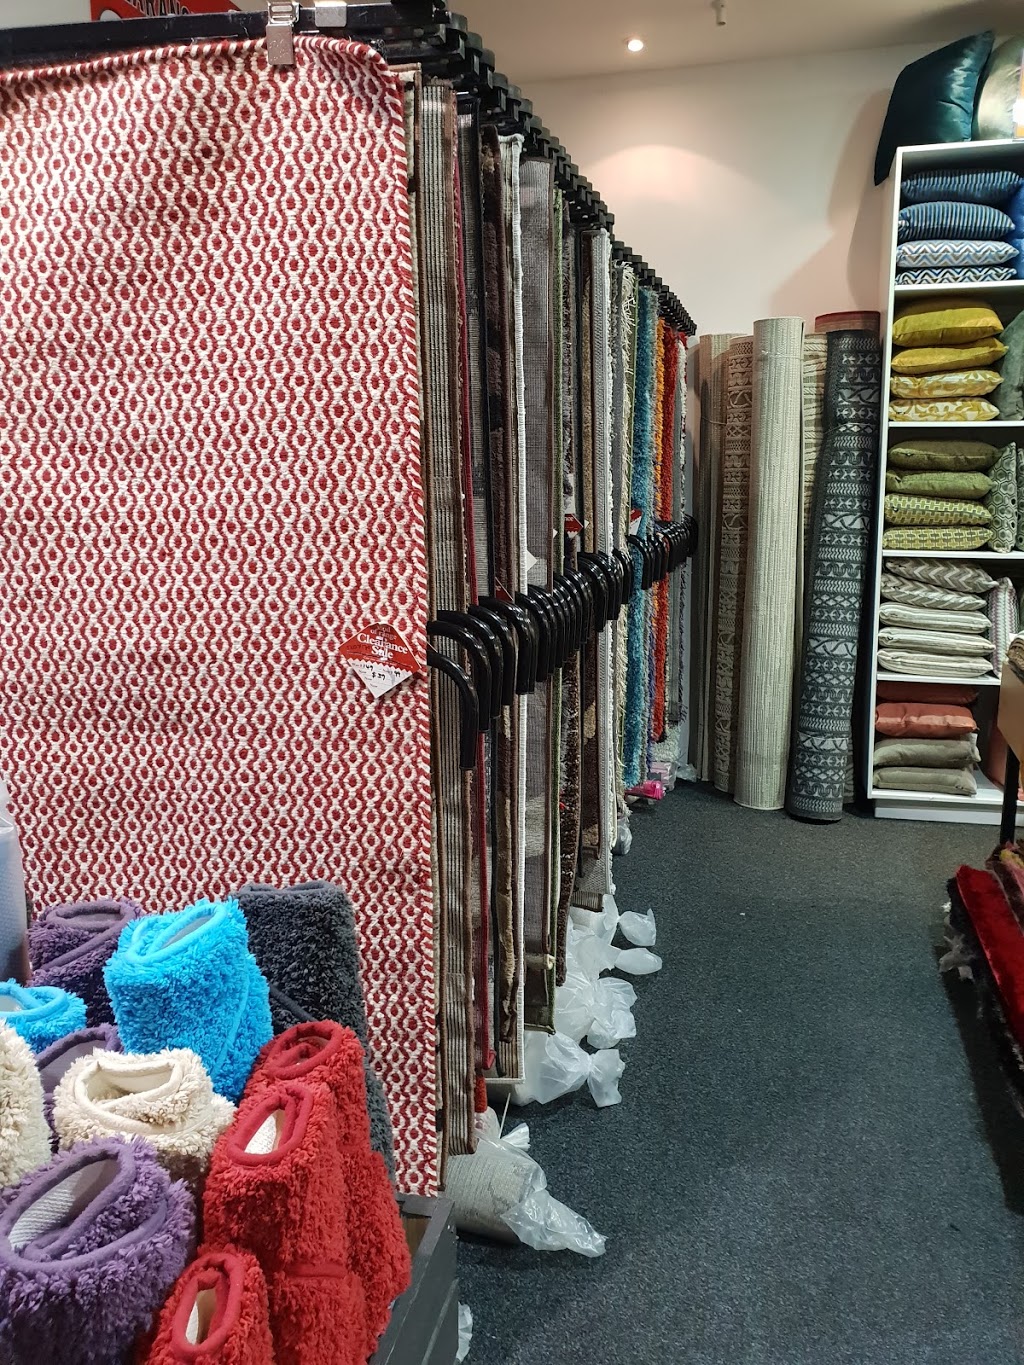 Rugs 4 Less Australia | Capalaba Park Shopping Centre Cnr Mount Cotton Rd and, Redland Bay Rd, Capalaba QLD 4157, Australia | Phone: (07) 3823 1269